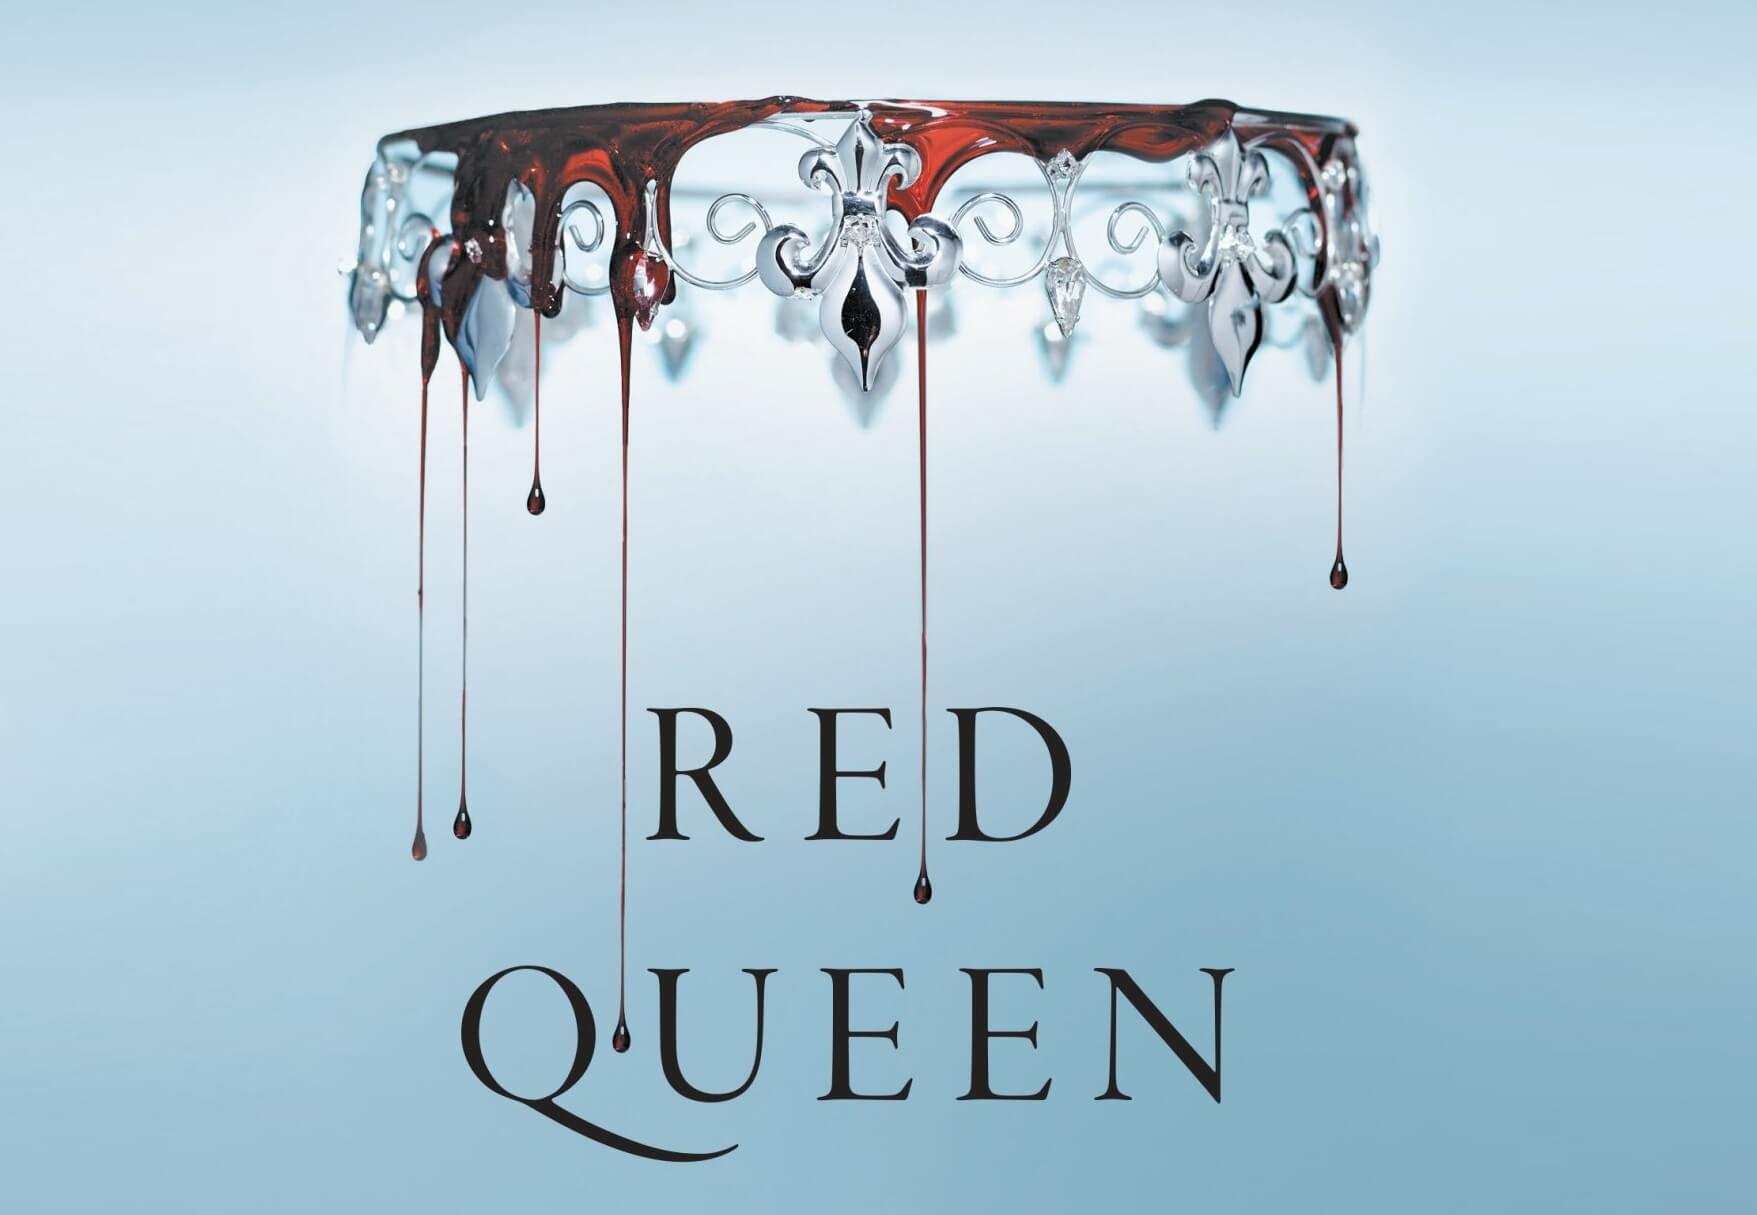 Red Queen novel from author Victoria Aveyard gets television adaptation helmed by Elizabeth Banks